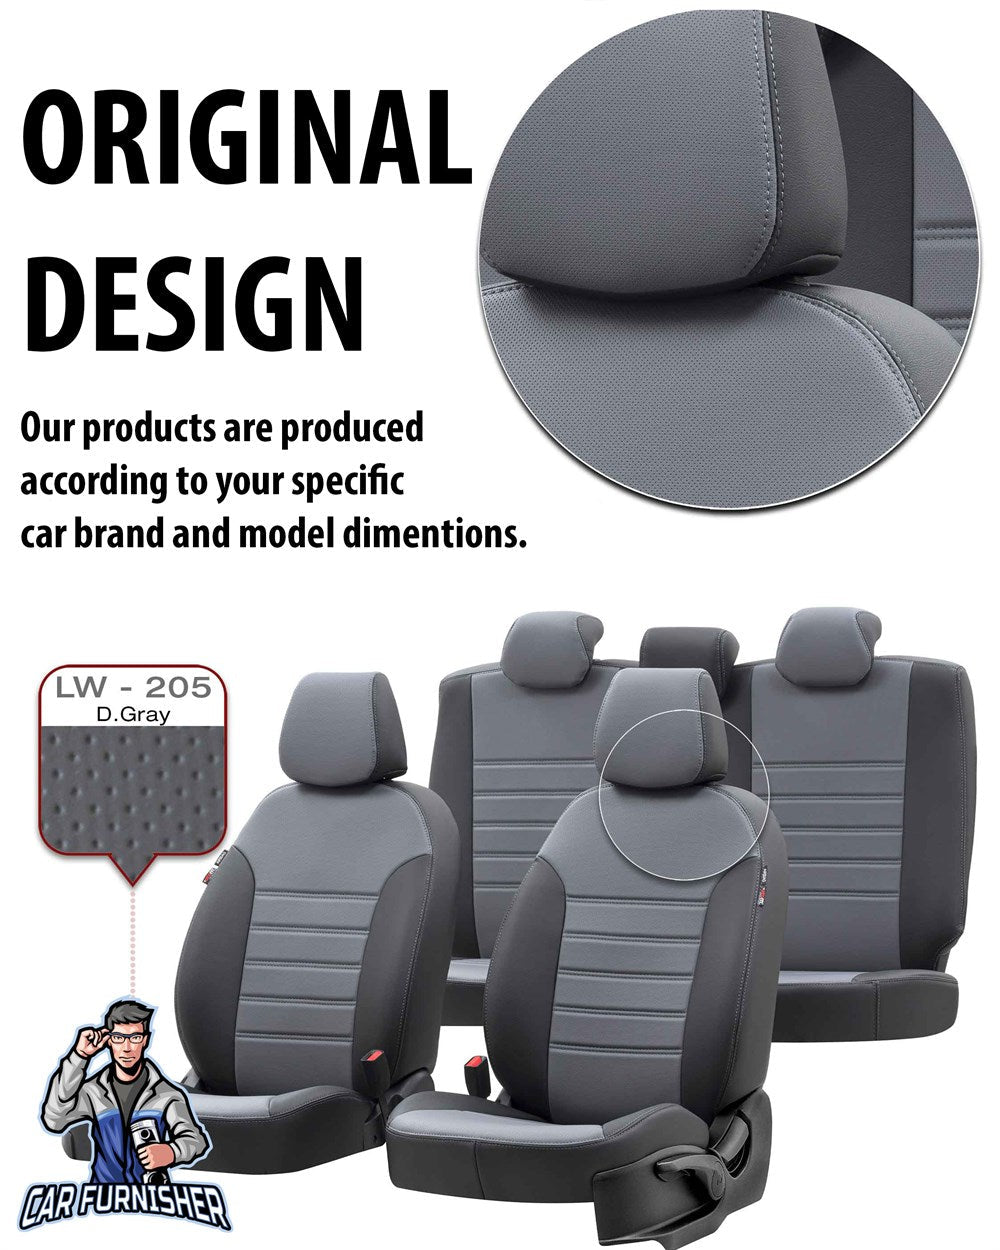 Volkswagen Caravelle Seat Cover Istanbul Leather Design Smoked Black Leather